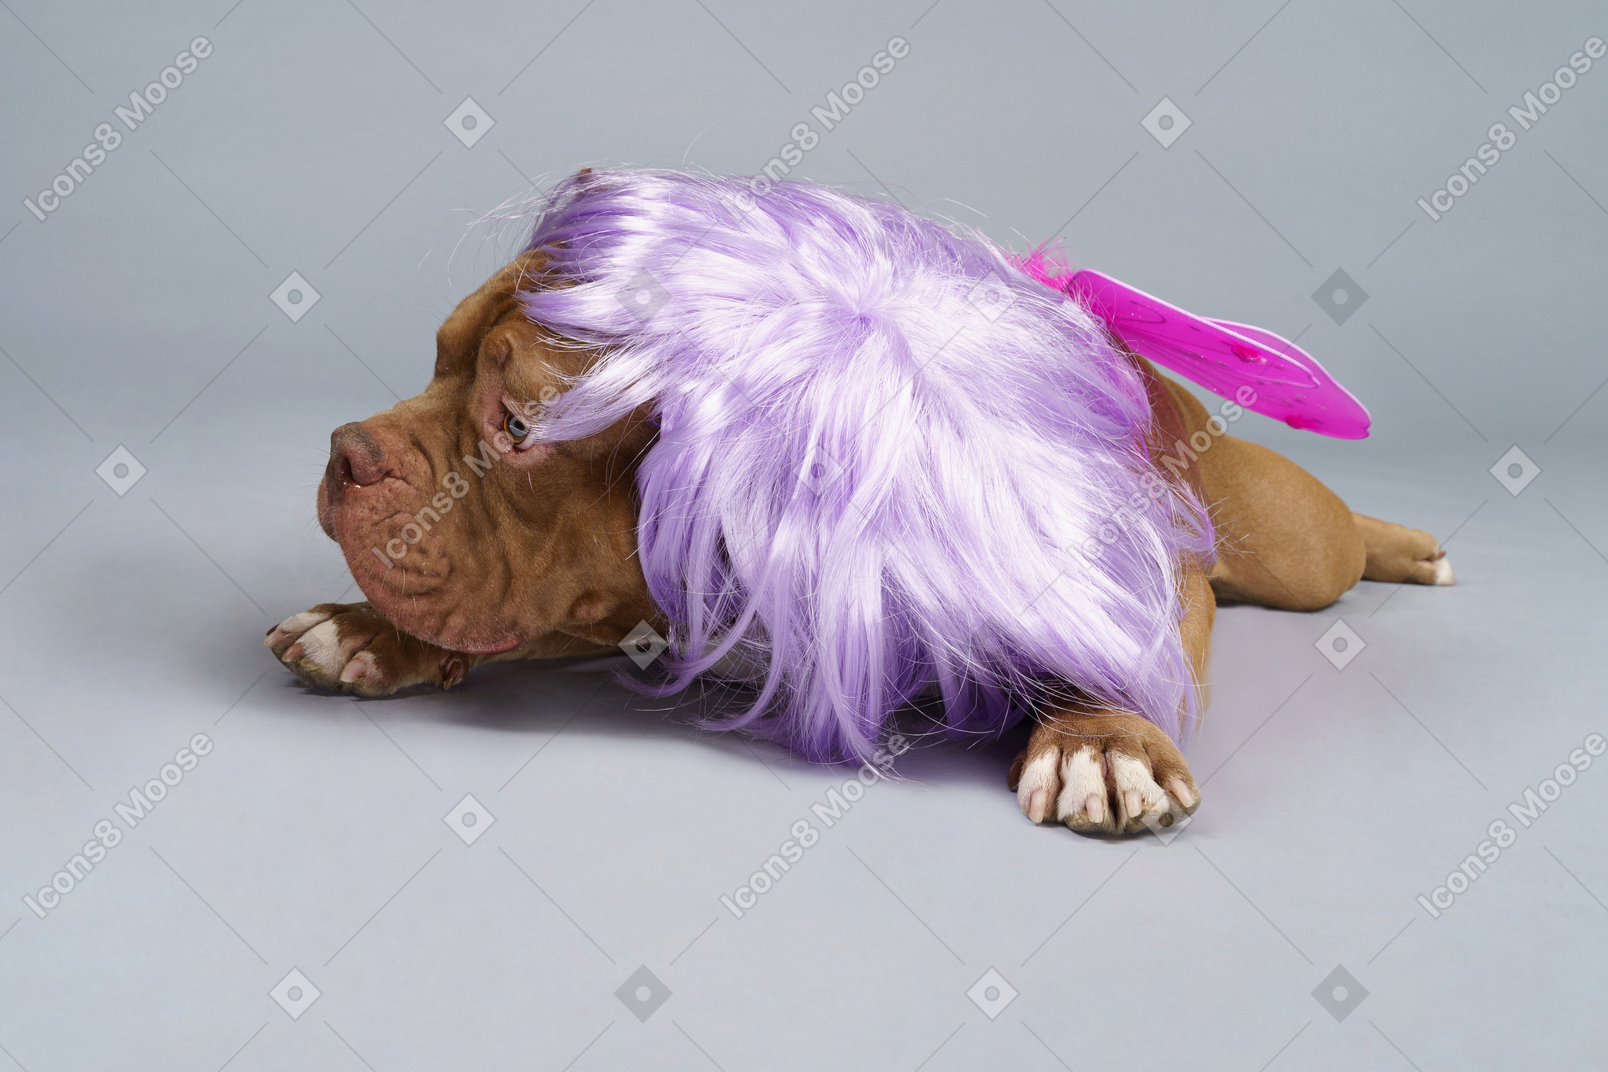 Front view of a tired dog fairy in purple wig lying